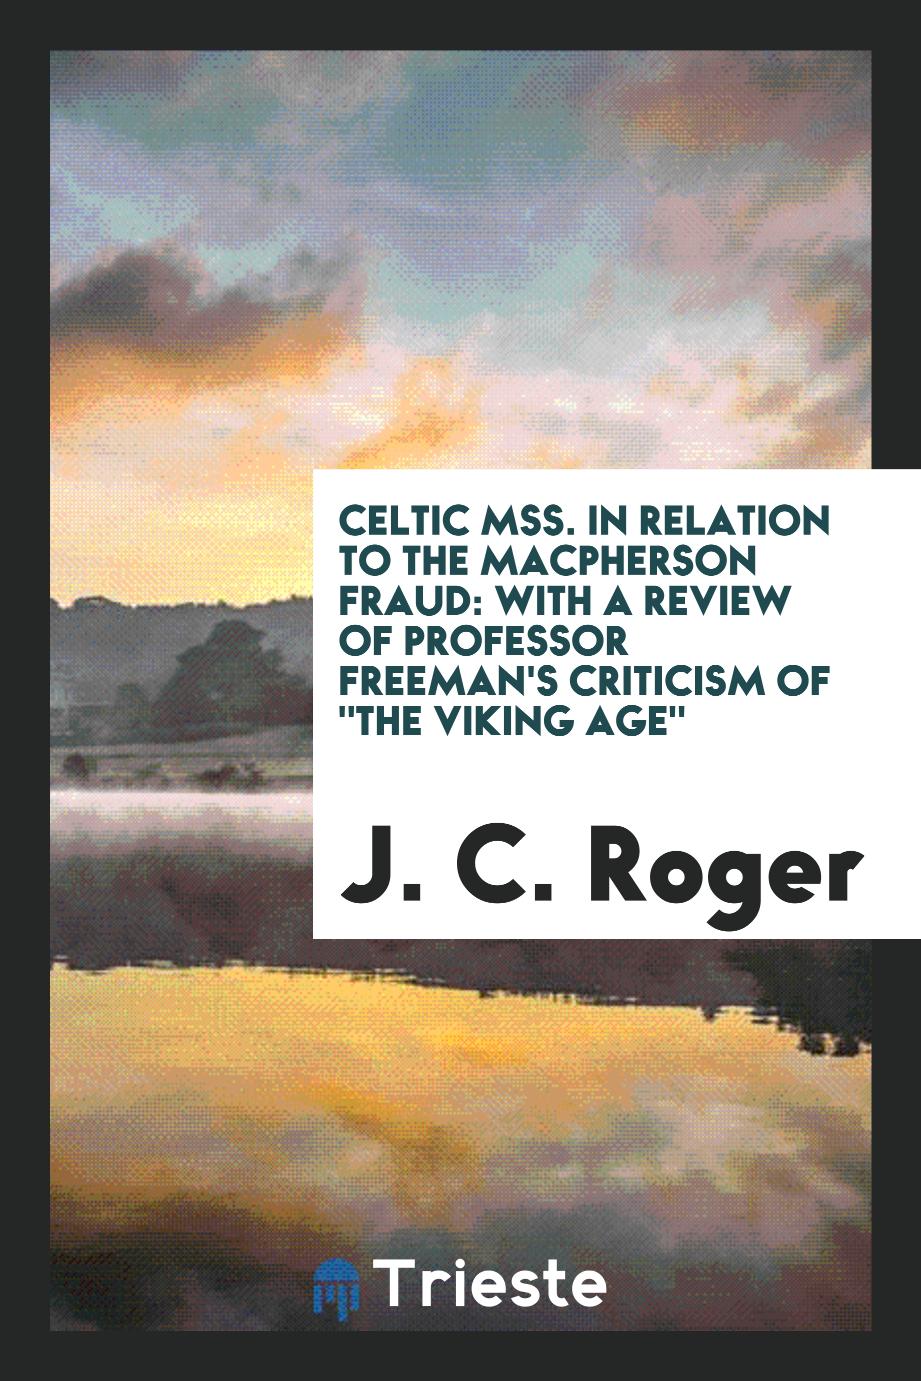 Celtic Mss. in Relation to the Macpherson Fraud: With a Review of Professor Freeman's Criticism of "The viking age"